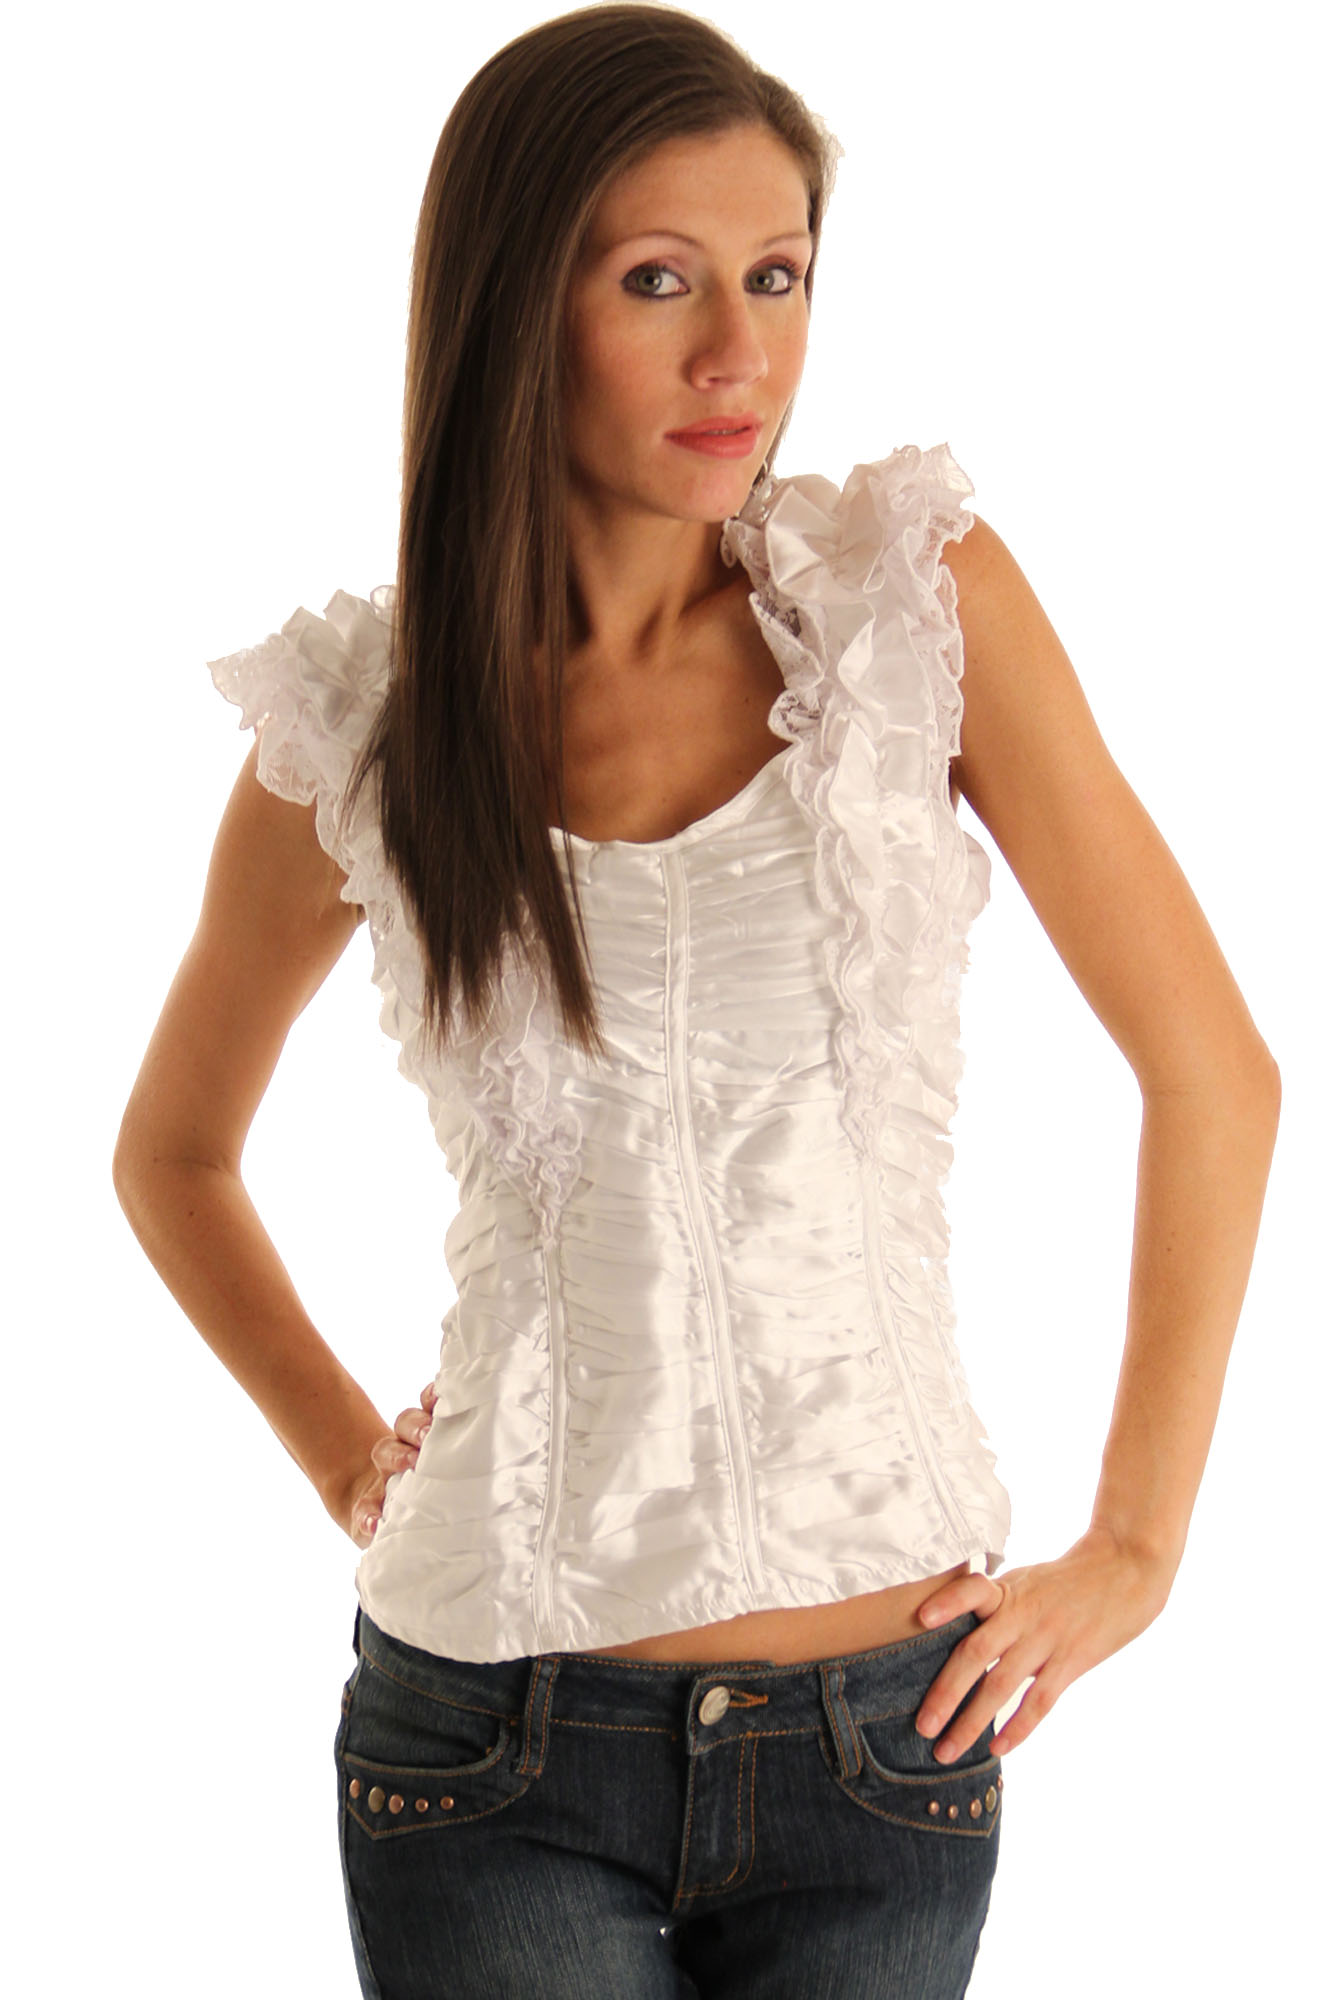 DHStyles.com DHStyles Women's White Romantic Ruffled Satin and Lace Top